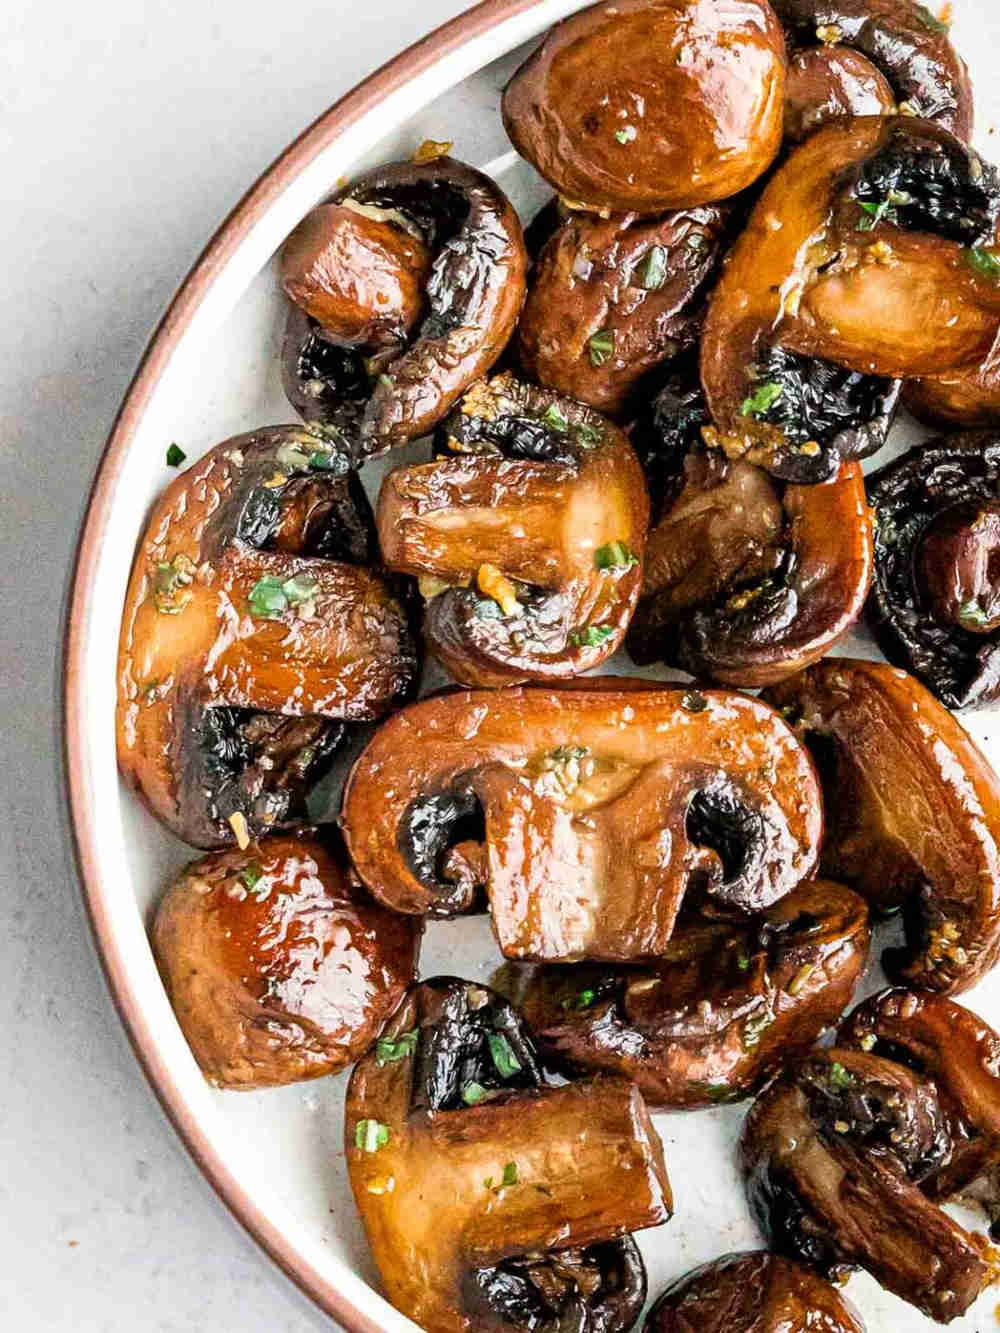 Easy Sauteed Mushrooms with Garlic Butter